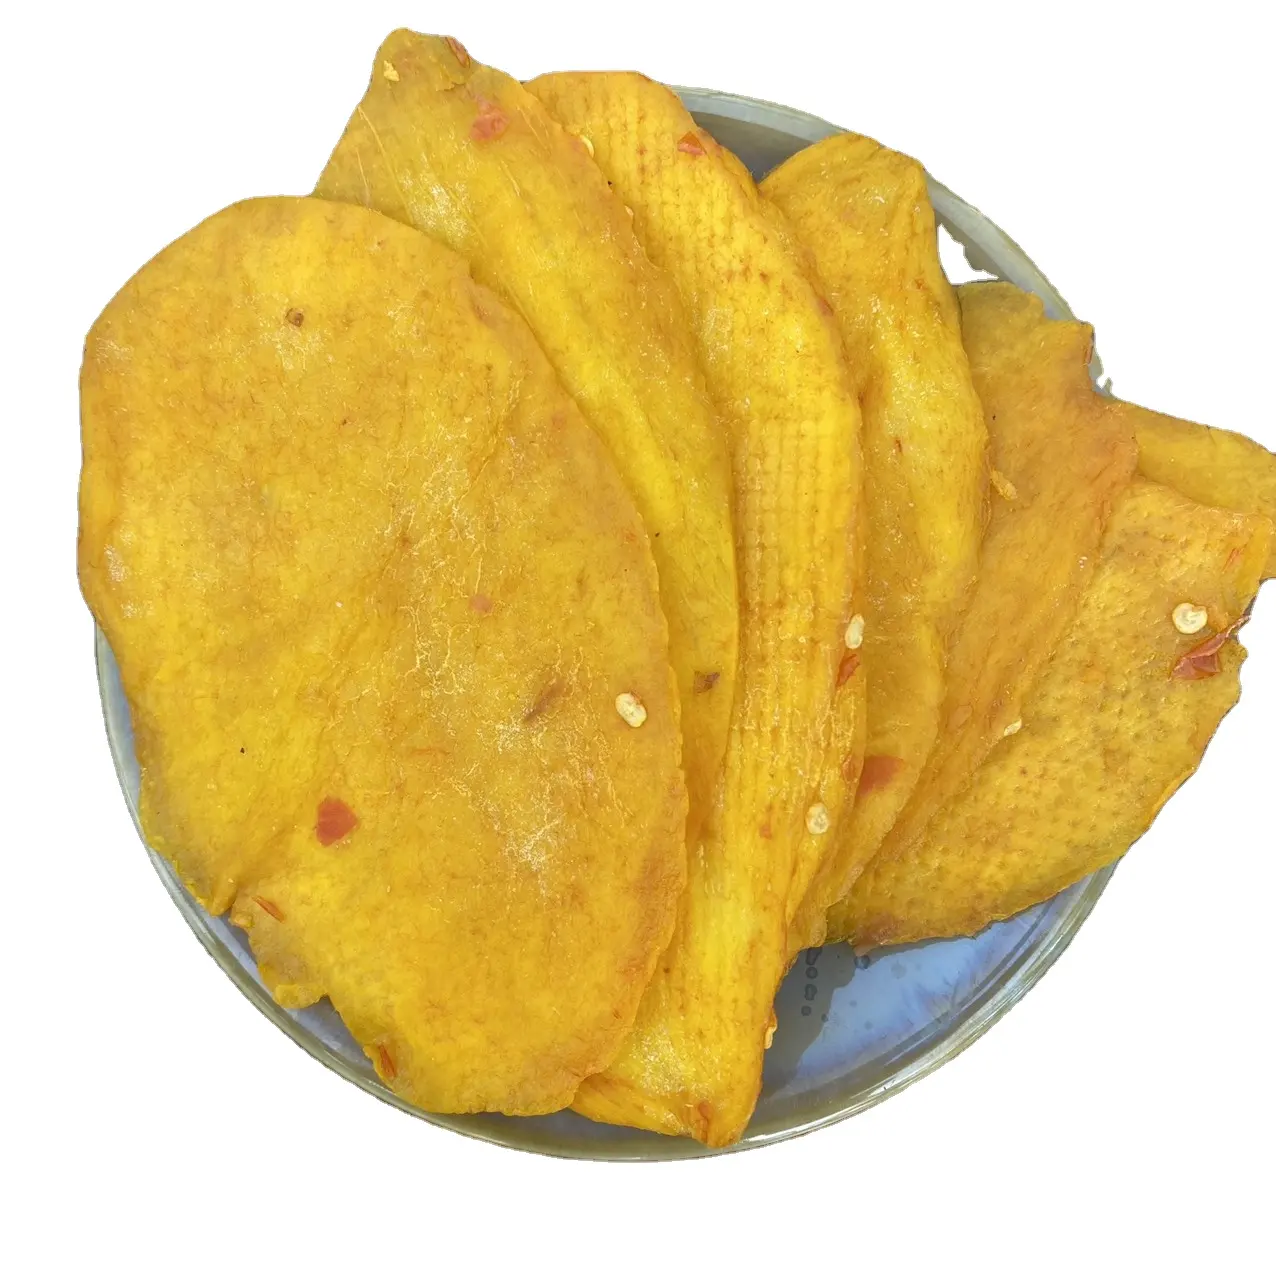 Delicious food for every picnic - Soft Dried Mango Light Spicy Slices 100% Natural - Made in Vietnam - Healthy Snack